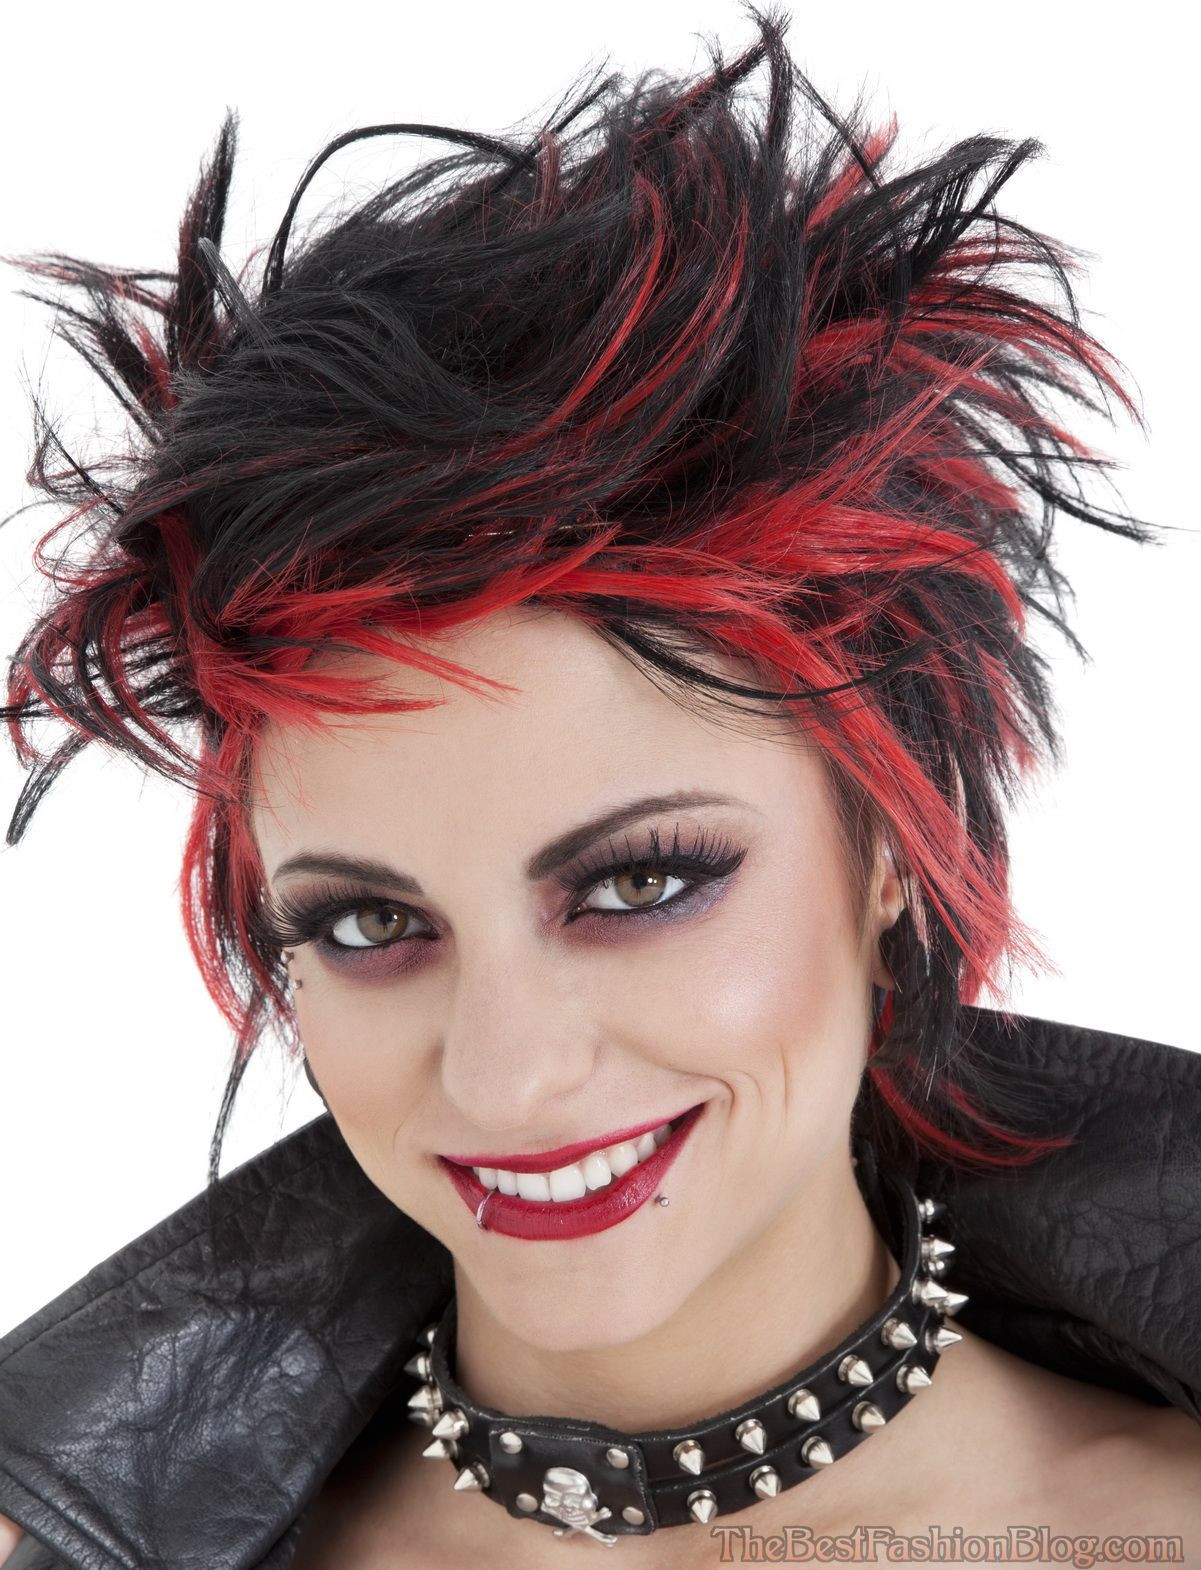 Female Punk Hairstyles
 Punk Hairstyles For Women 2019